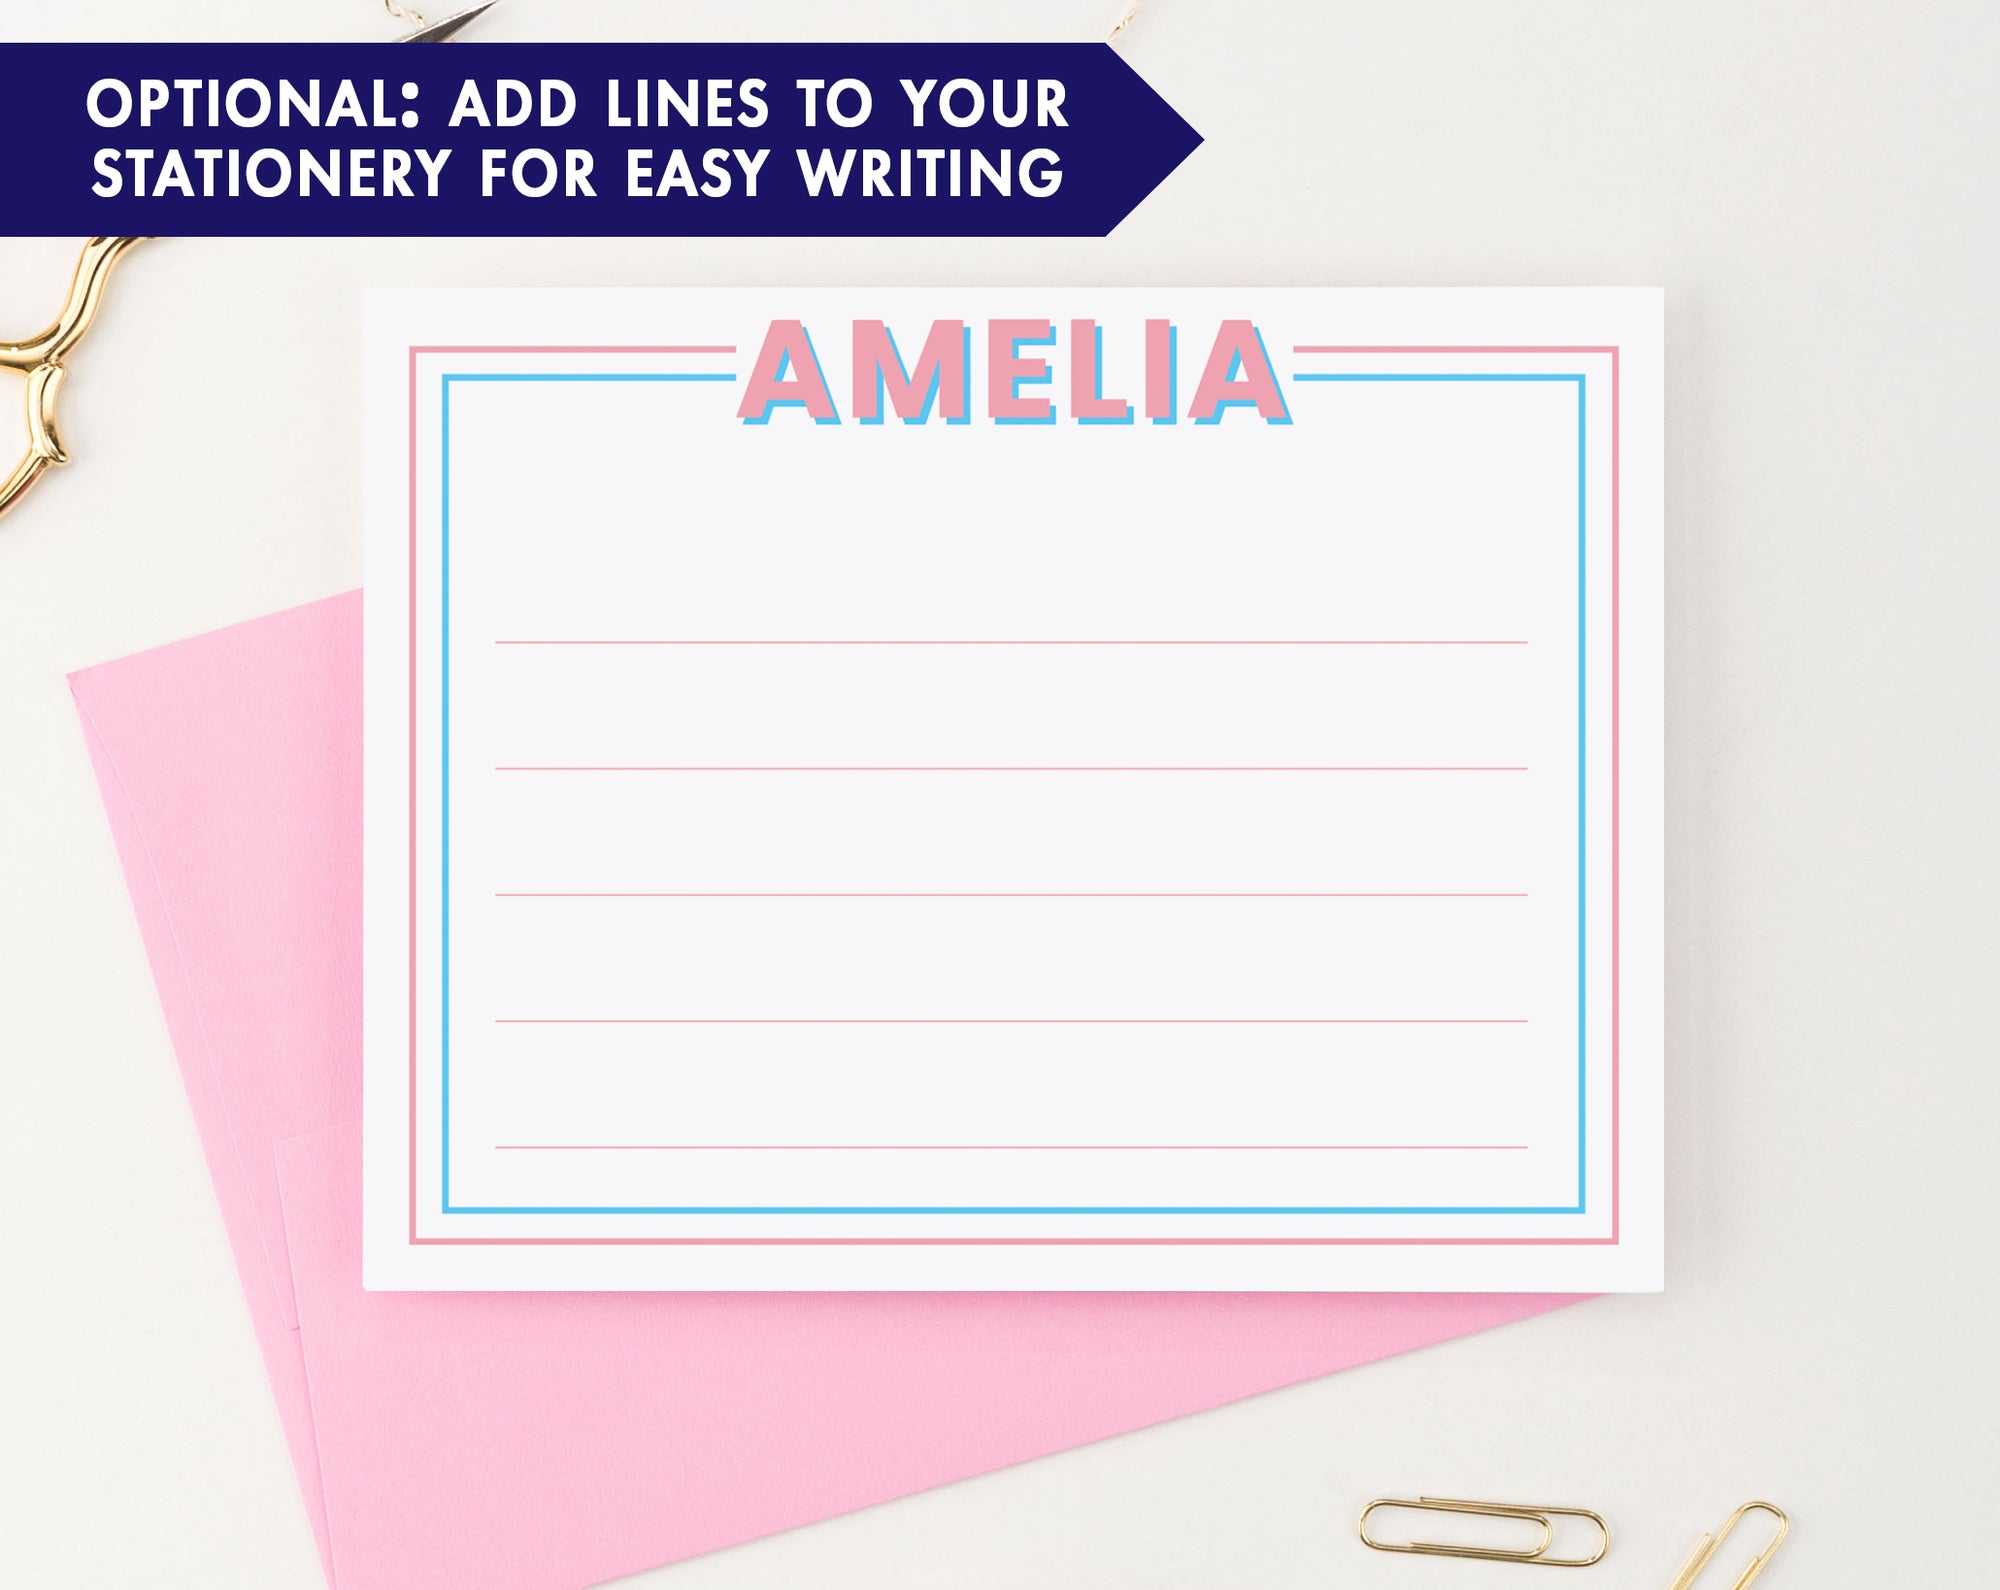 Kids Playful Personalized Stationery With Simple Border